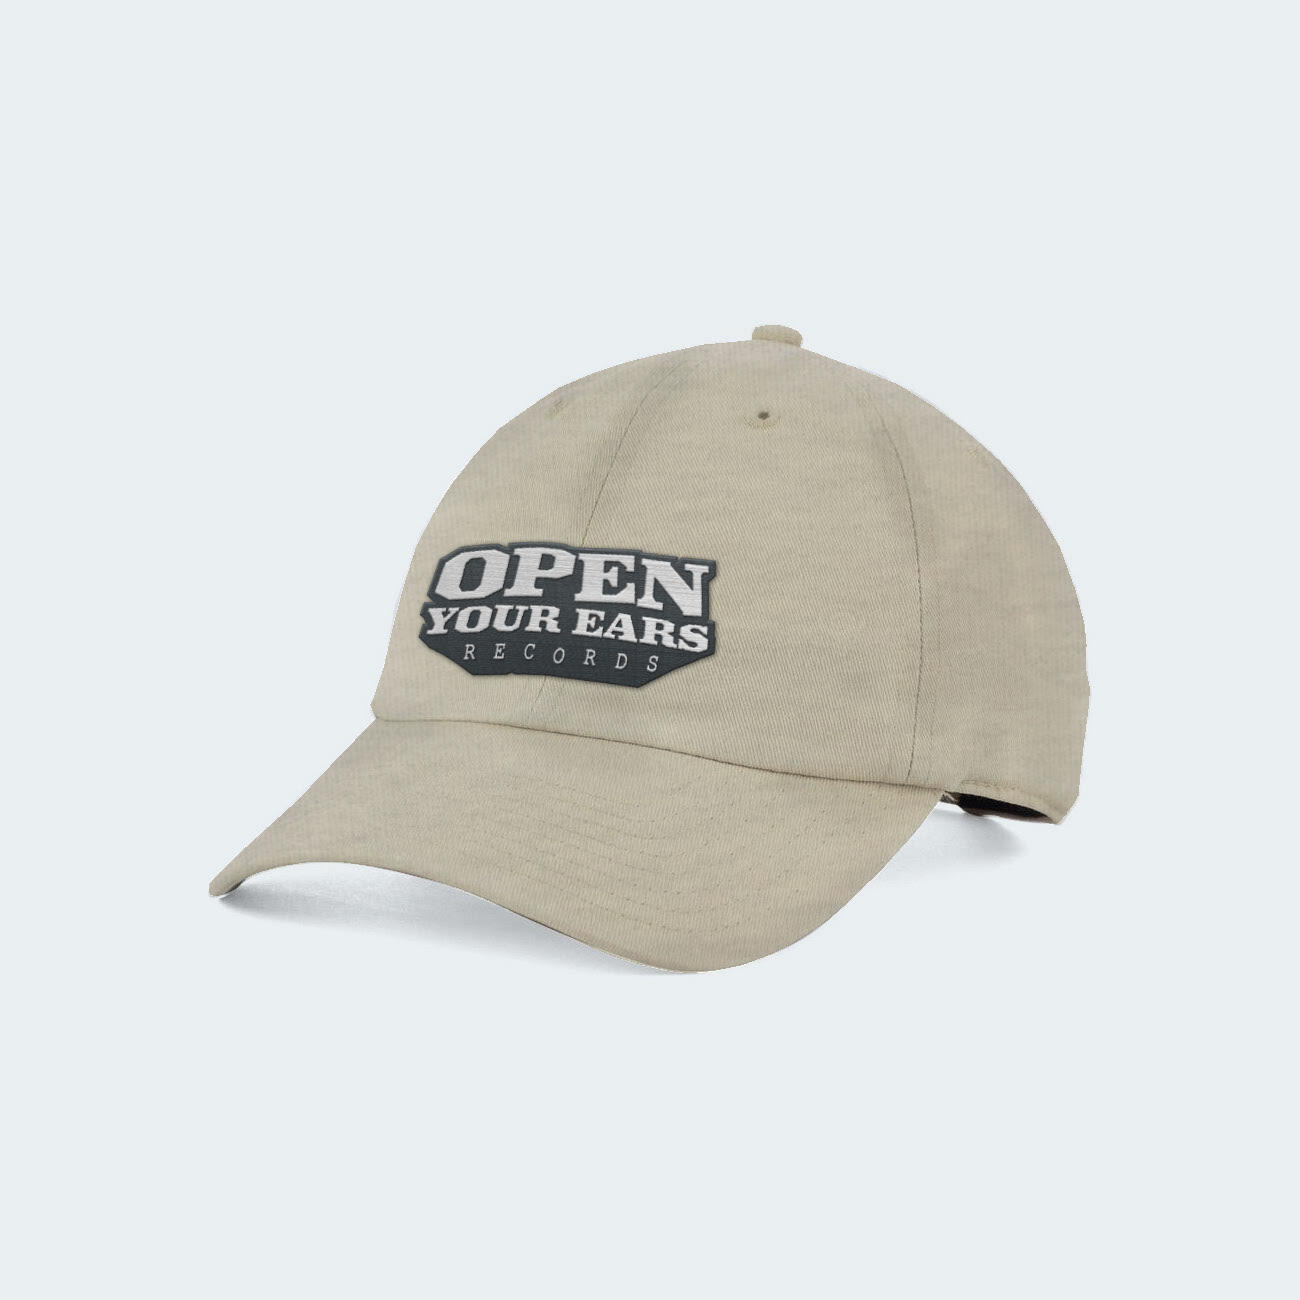 open your ears records hat front